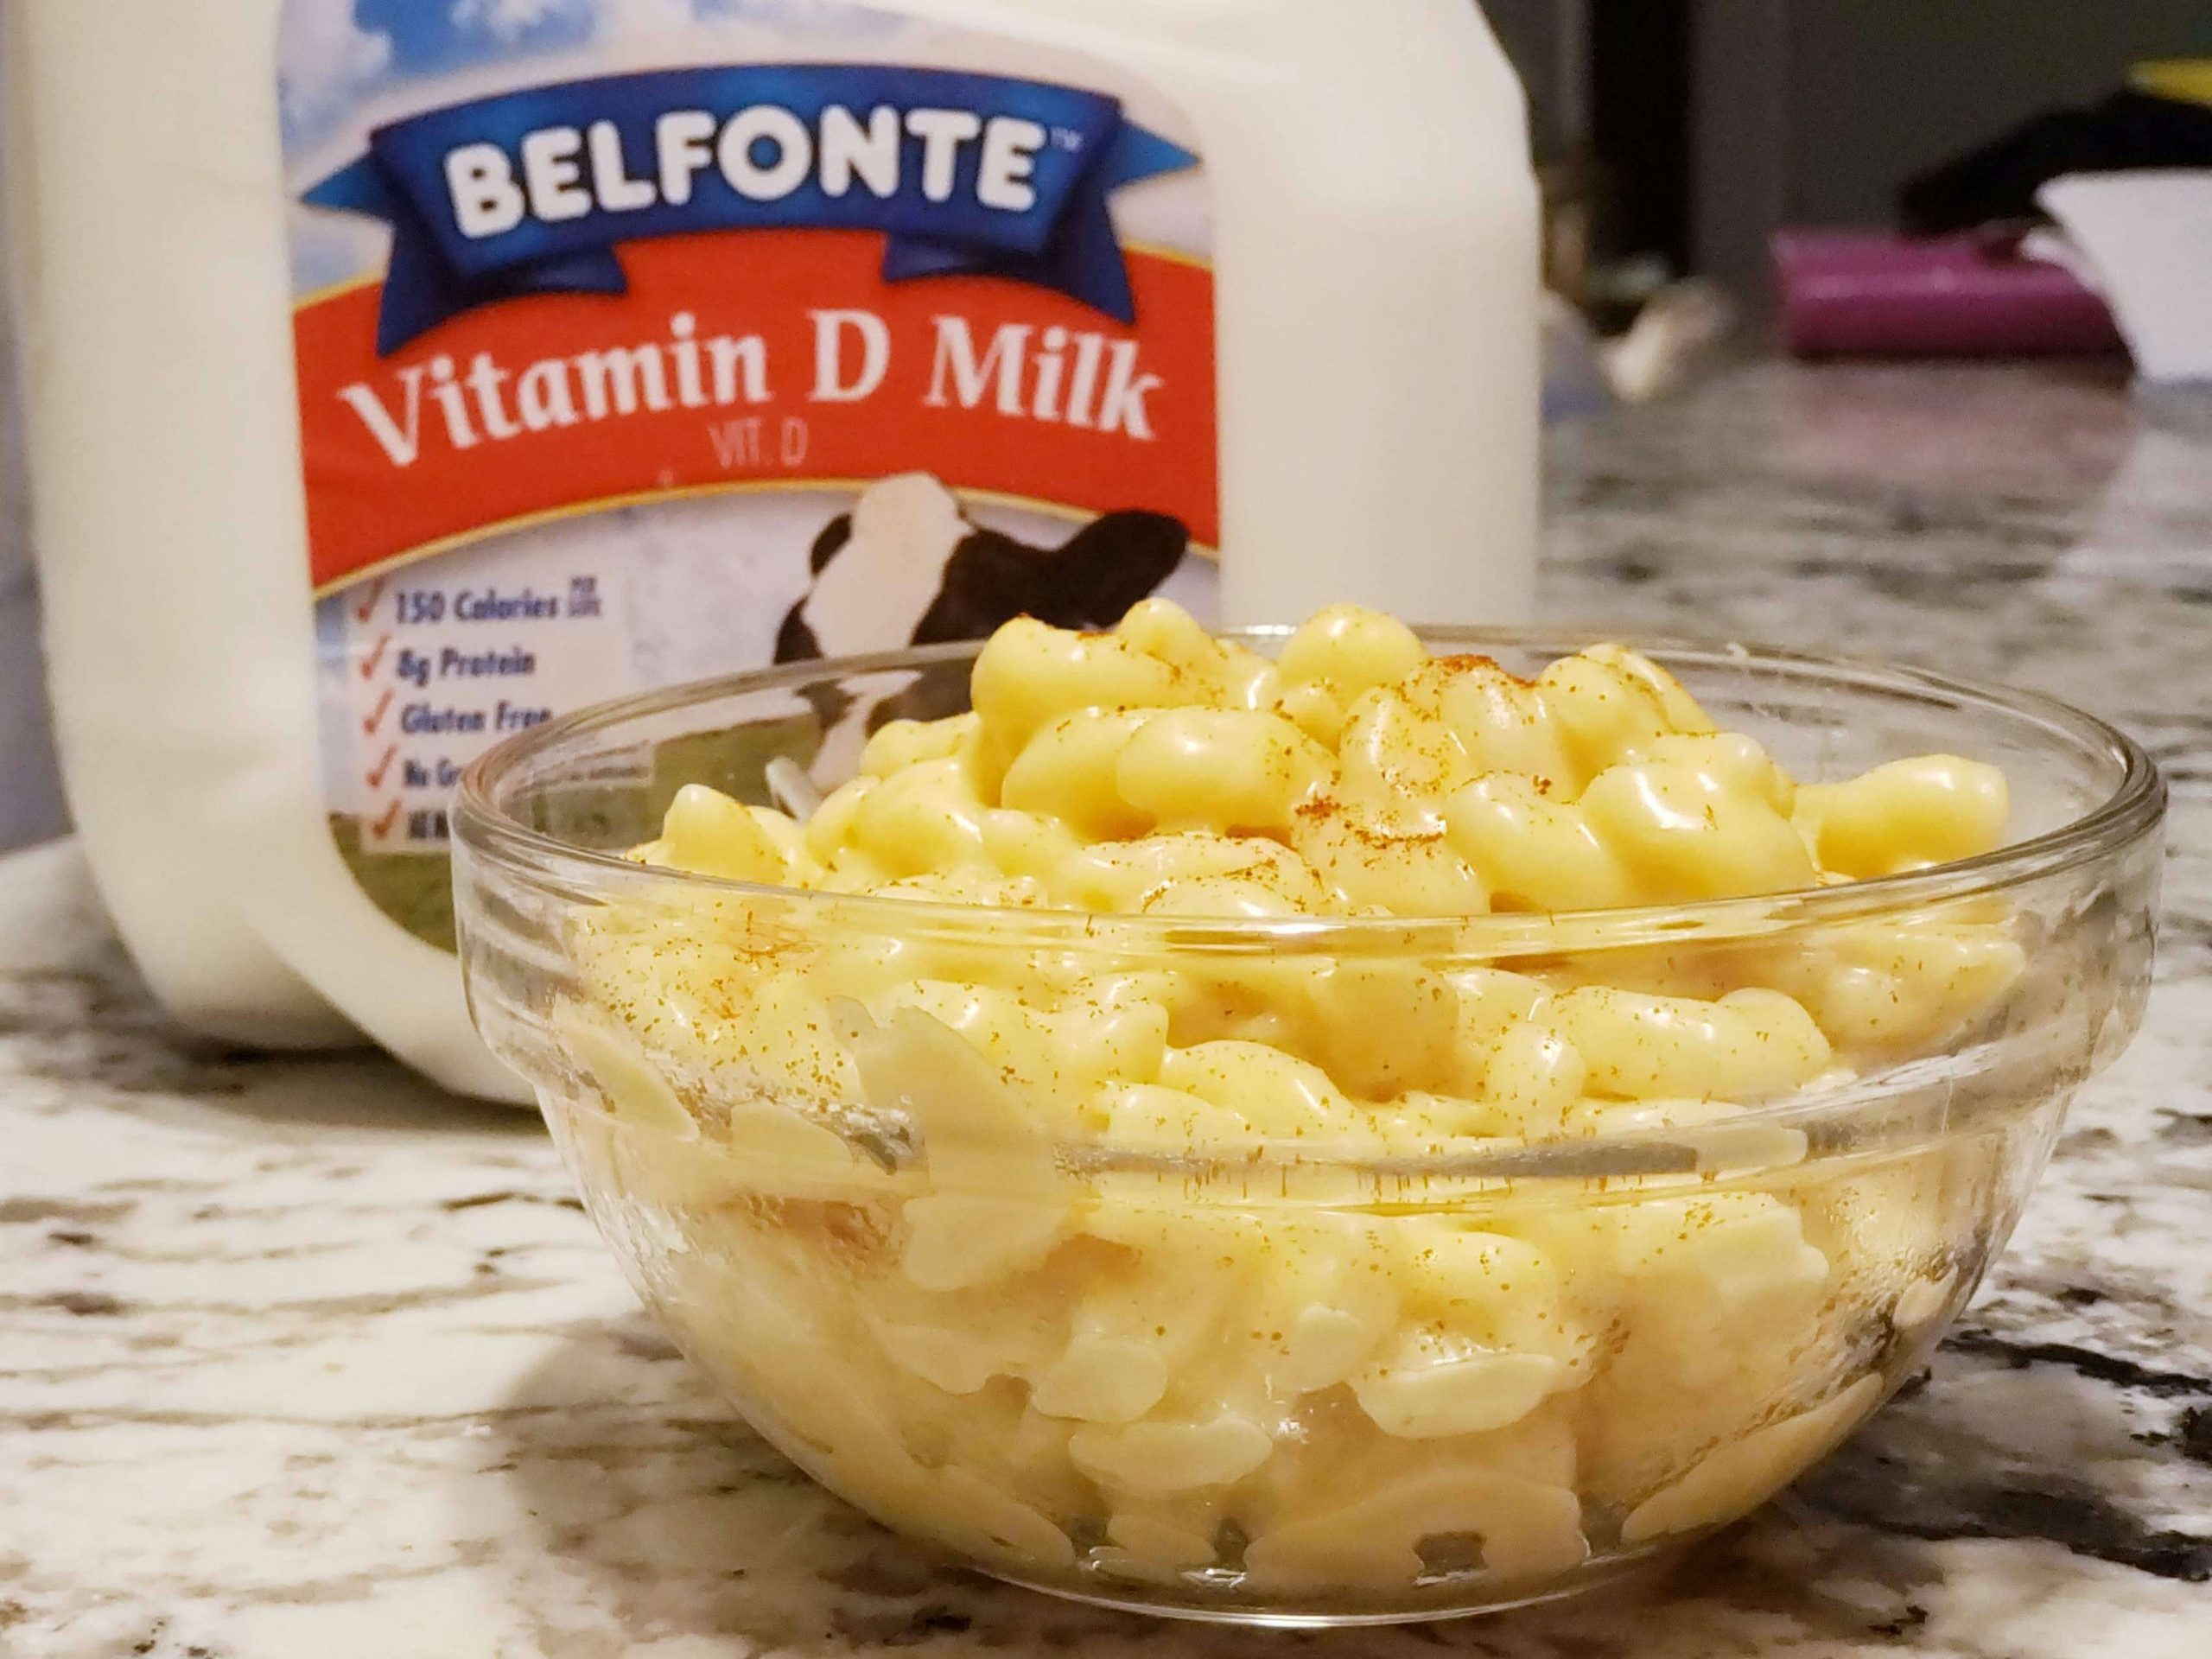 Easy Cheesy Mac and Cheese with Vitamin D Milk